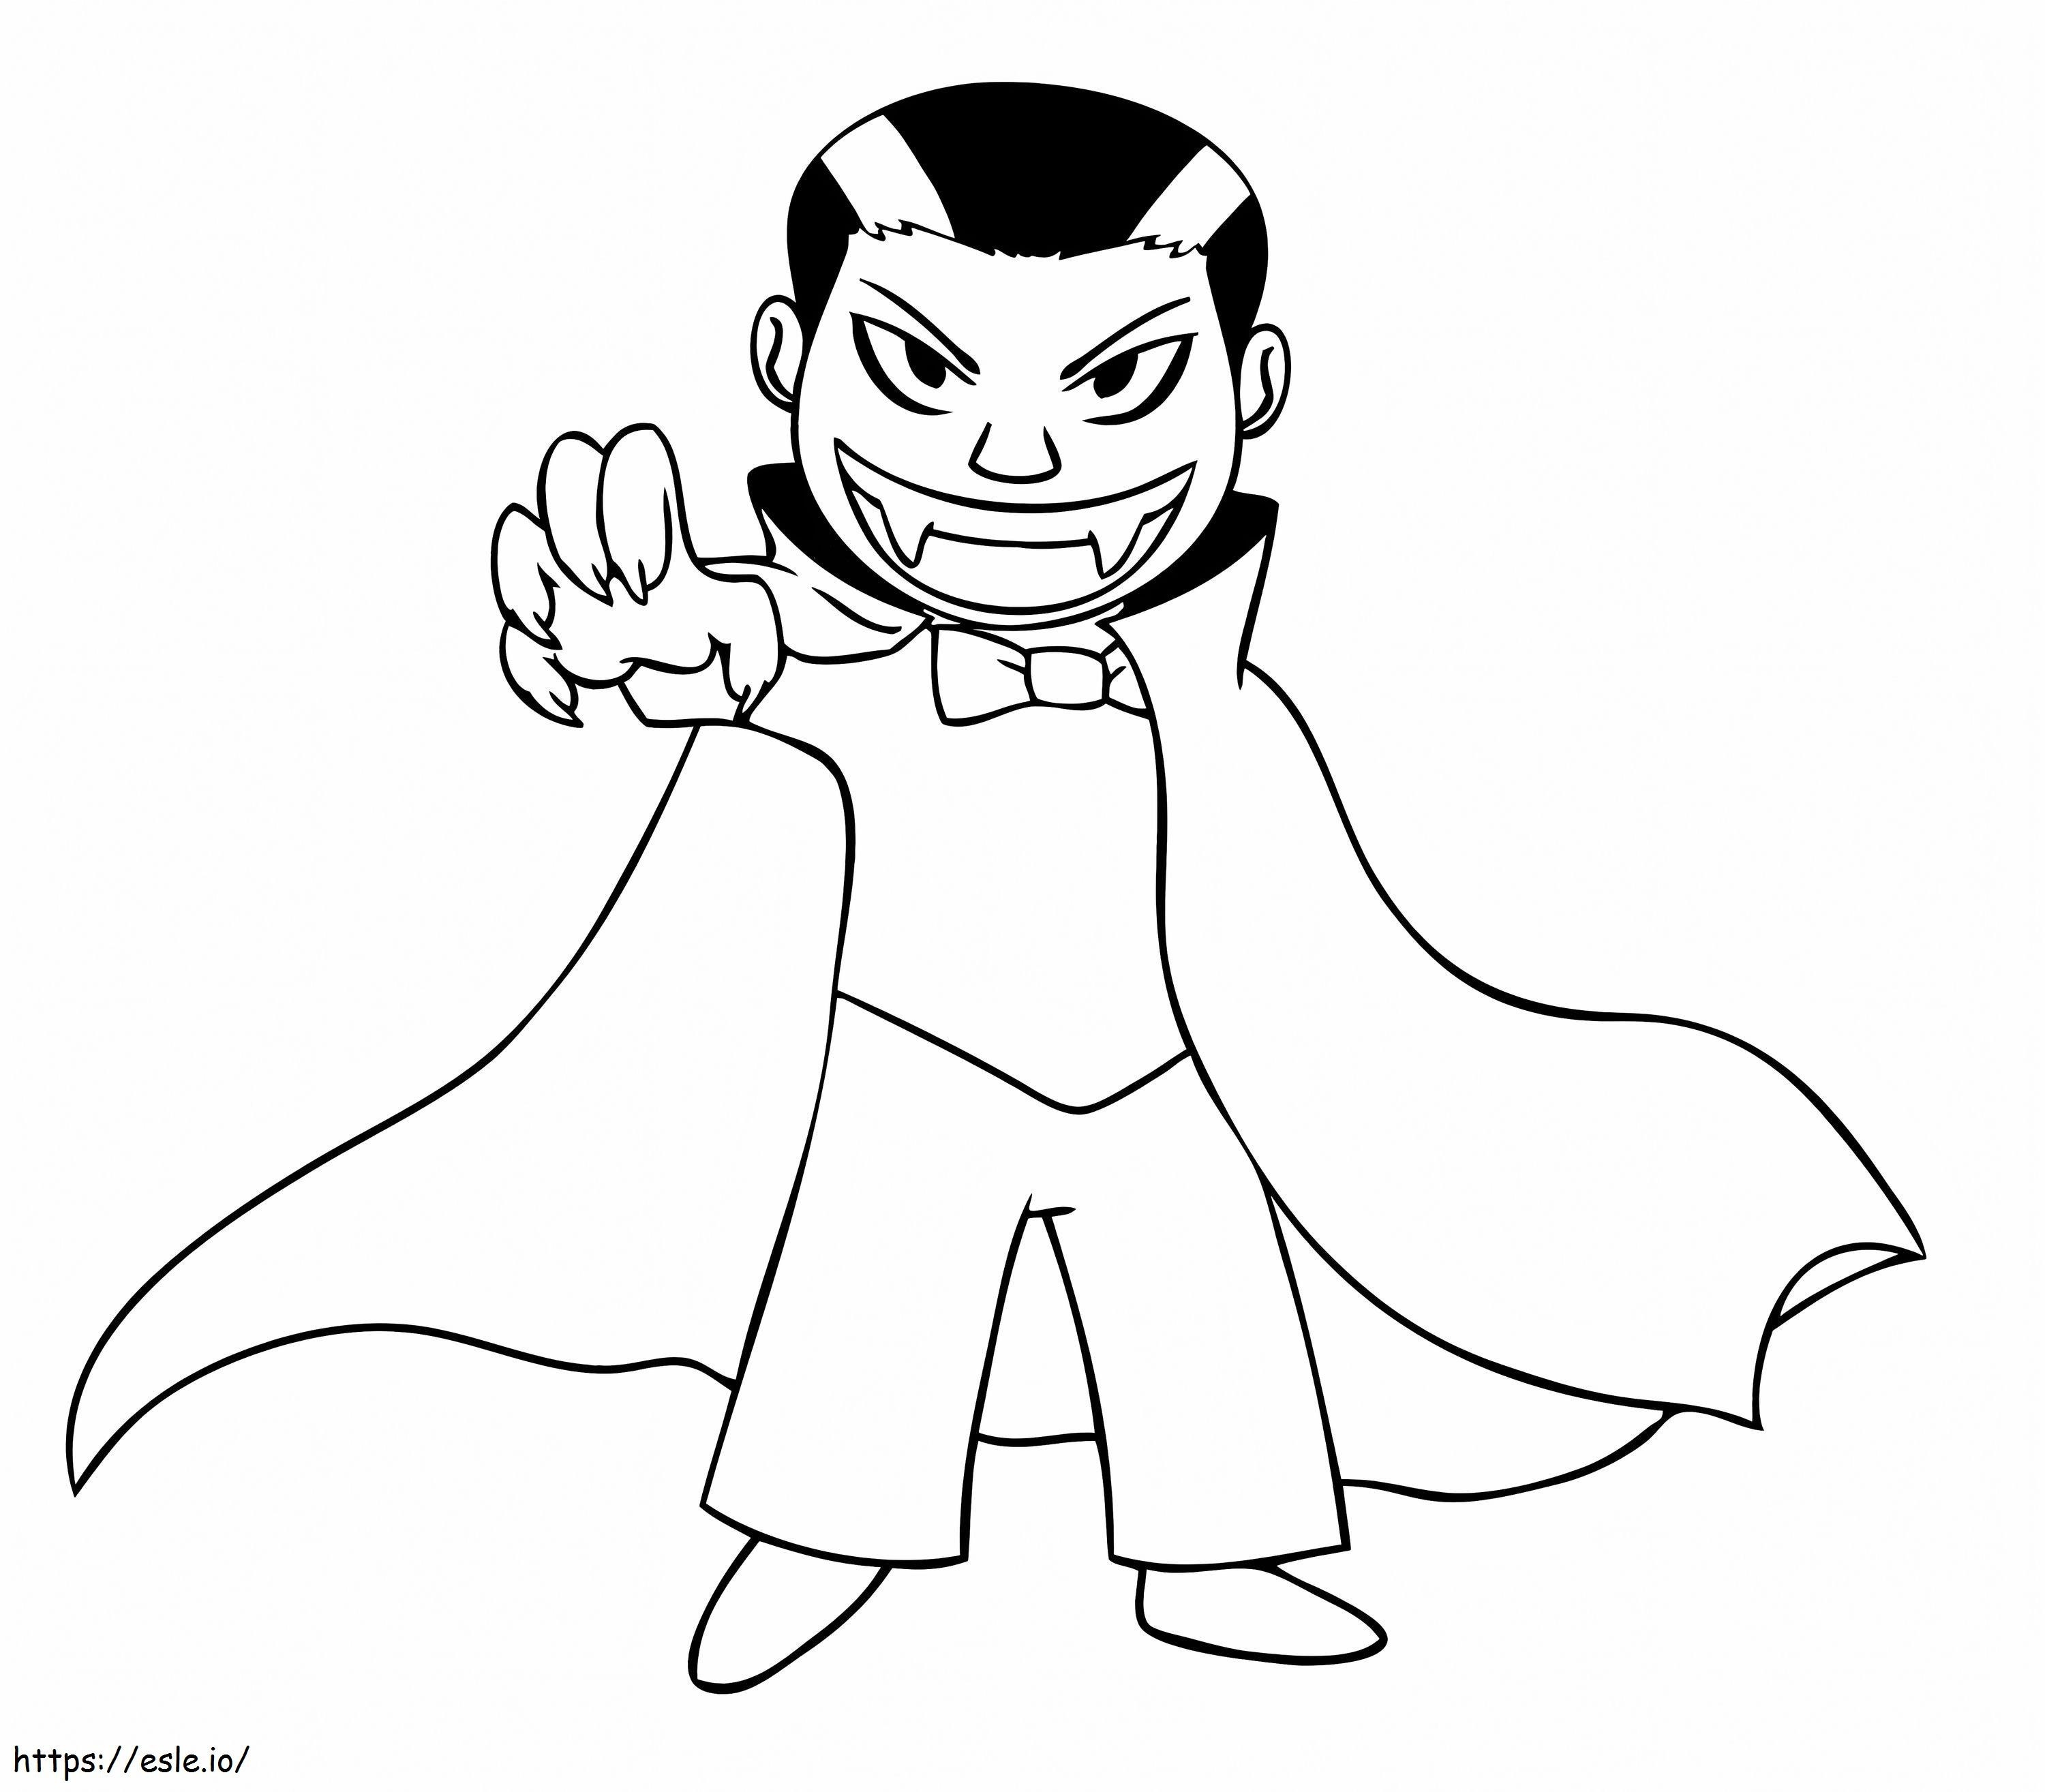 Cute Vampire coloring page